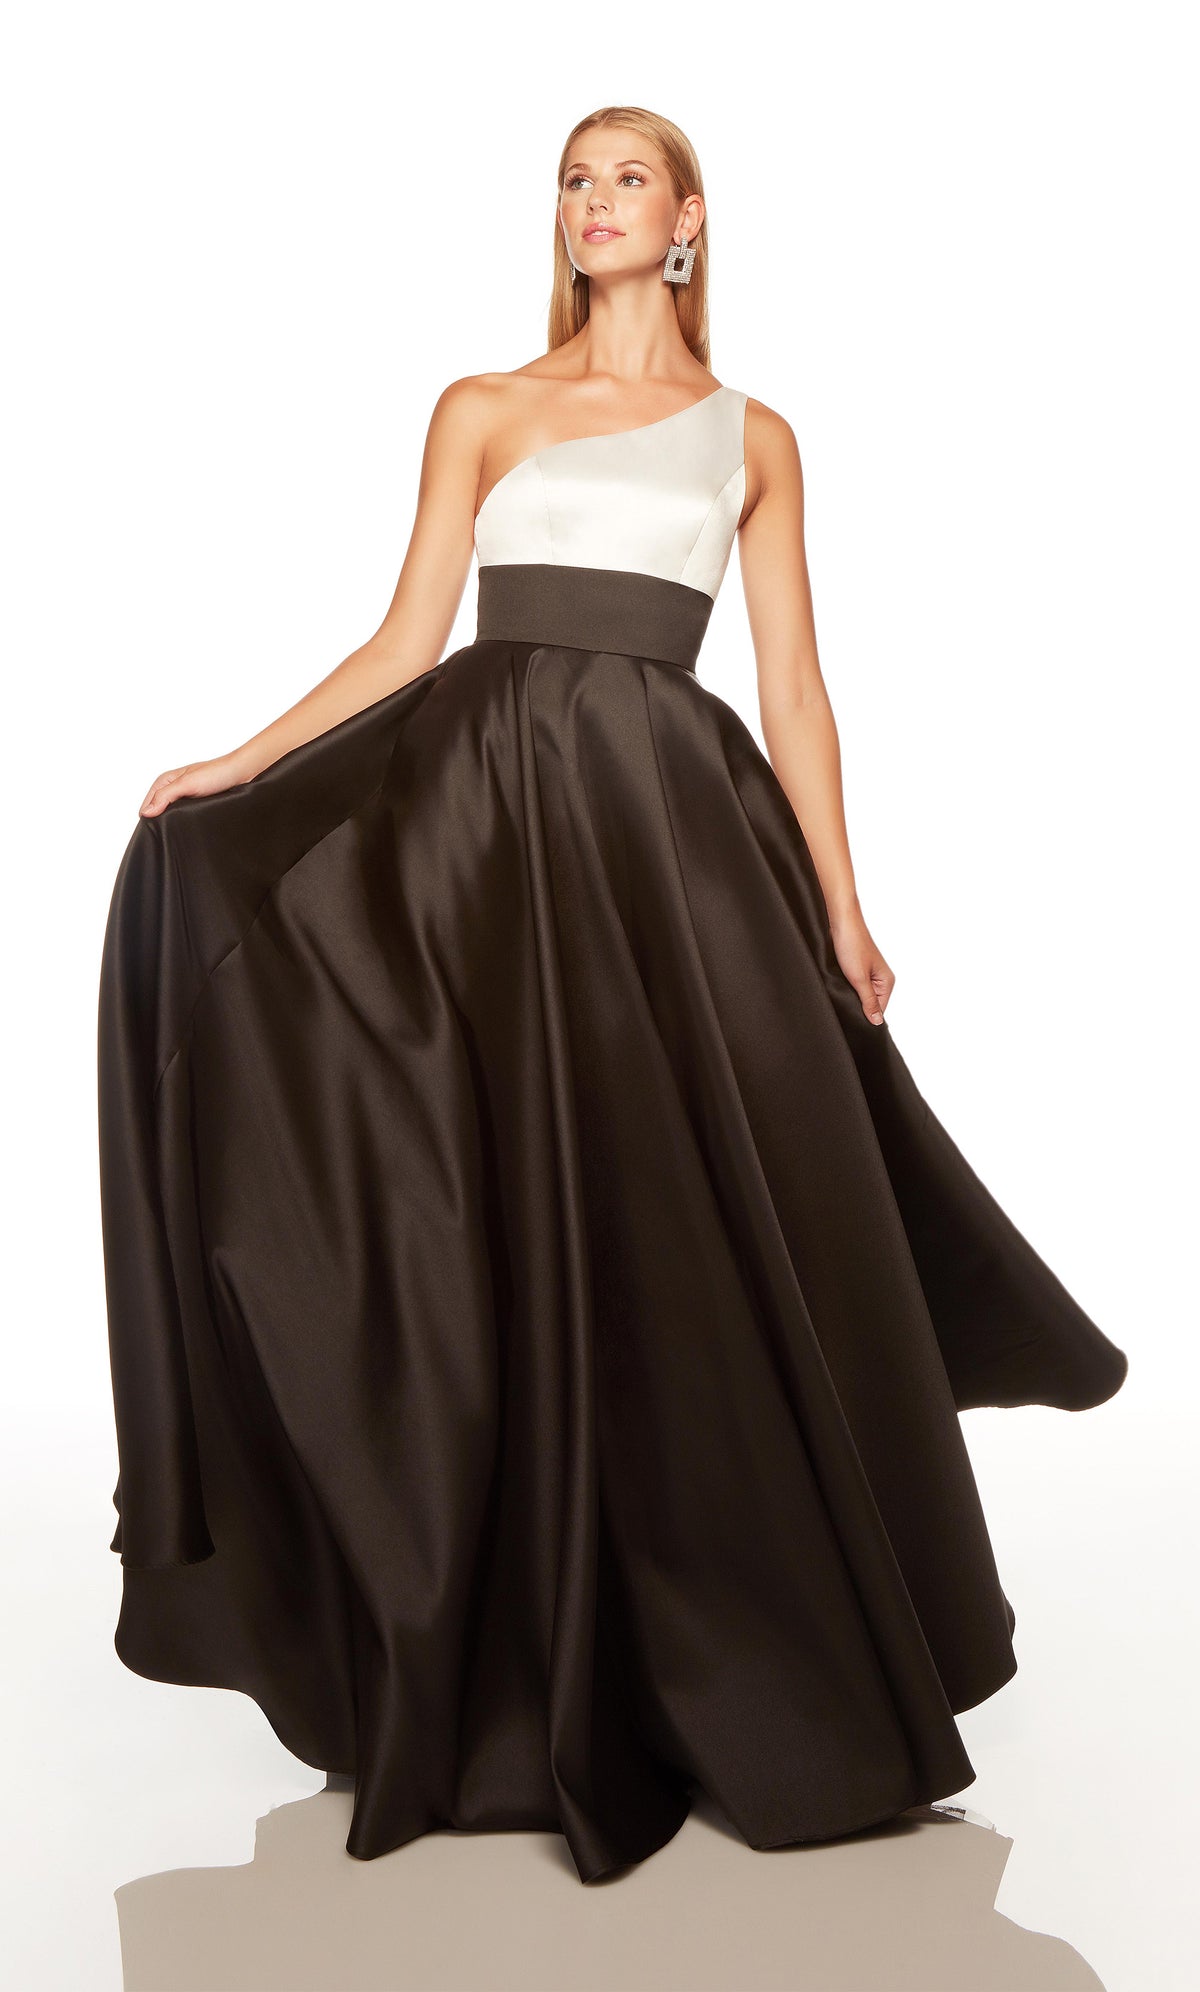 Black and white elegant gown with a one shoulder neckline, and pockets.